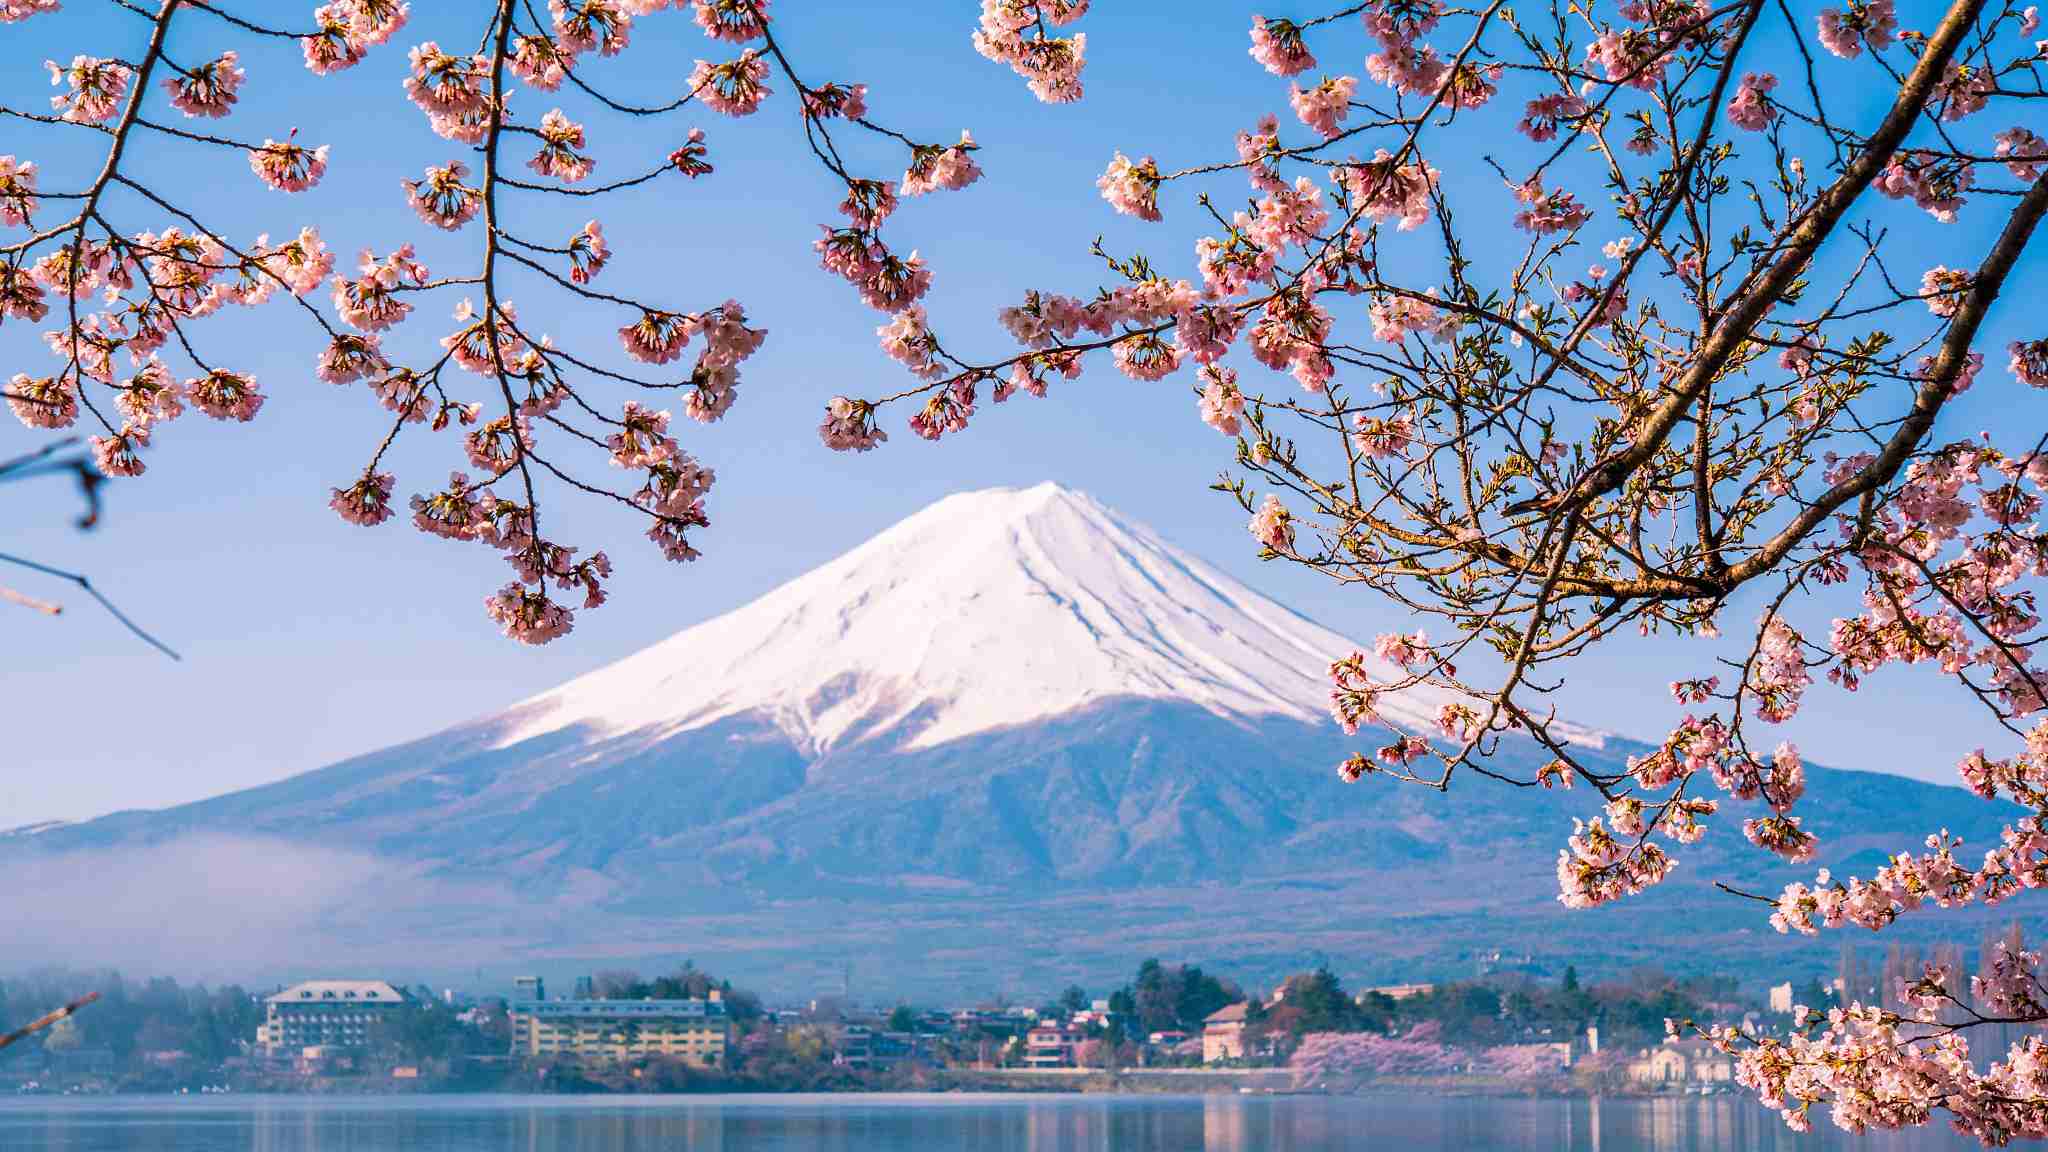 Mount fuji covered with snow and some cherry blossom branches around it